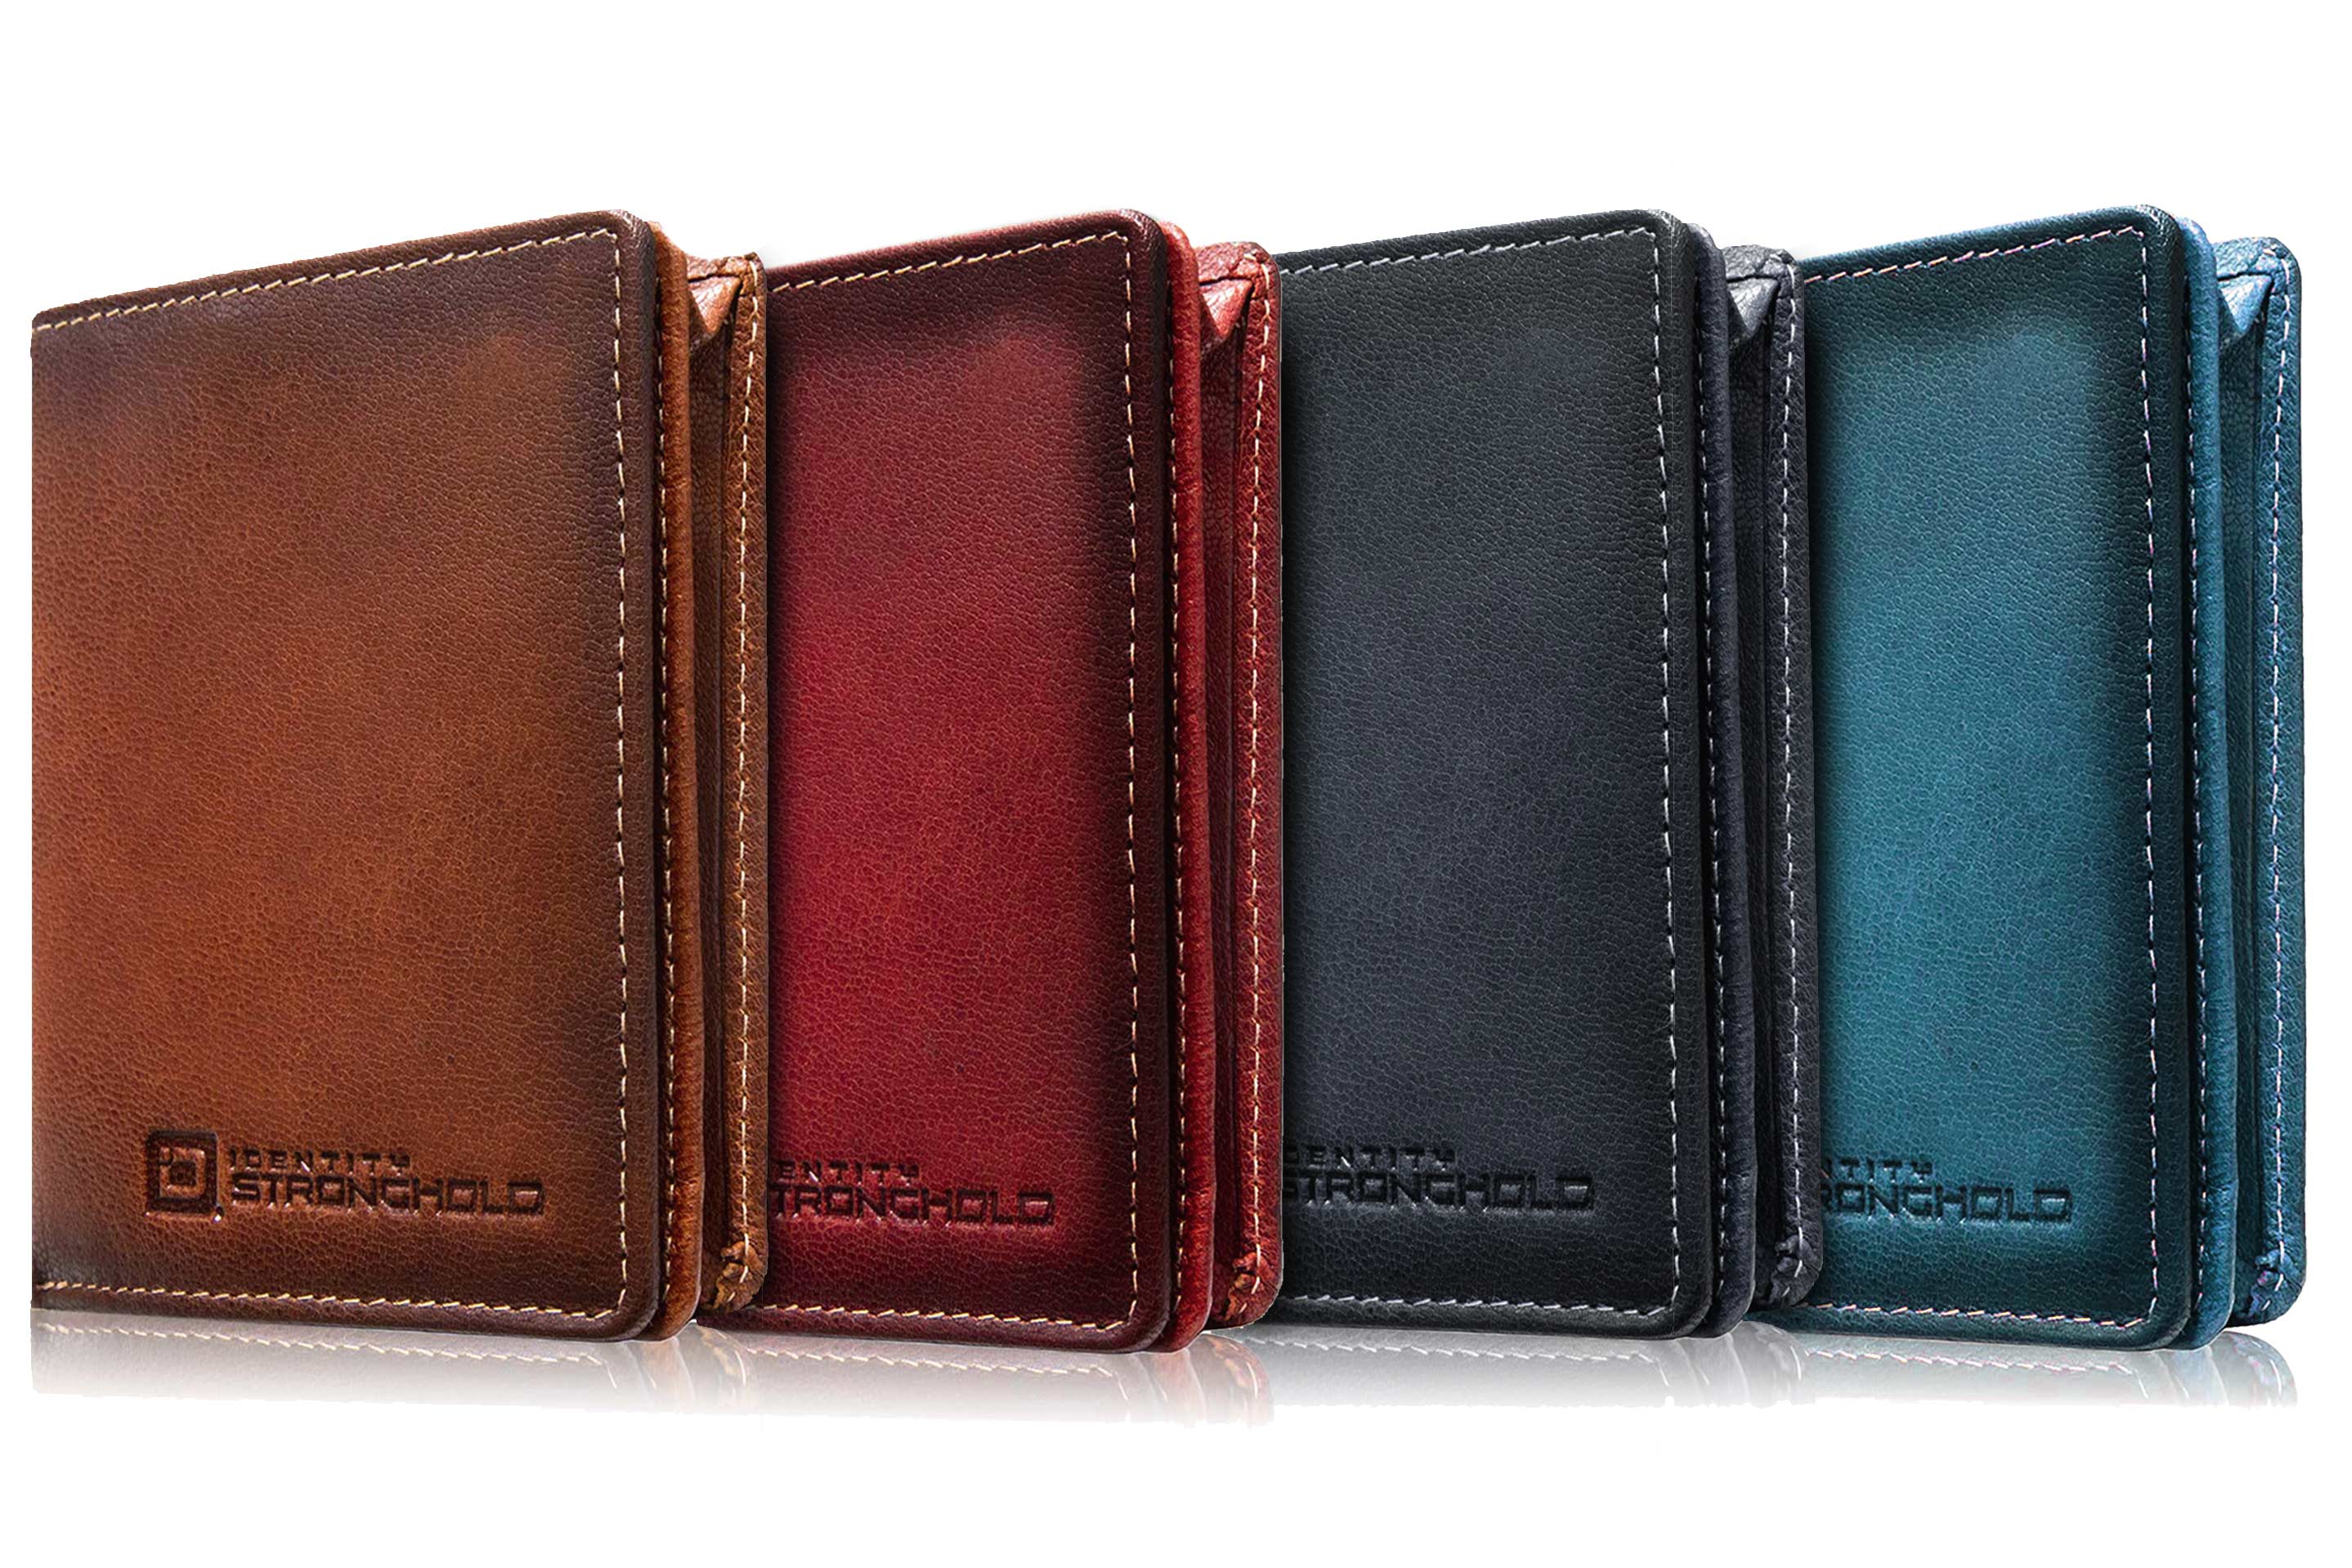 Long Purse Men's Black Brown Credit Card Holder Wallet For Men Pu Leather  12 Slots 2 Banknote Position 1 Photo Slot, Don't Miss These Great Deals